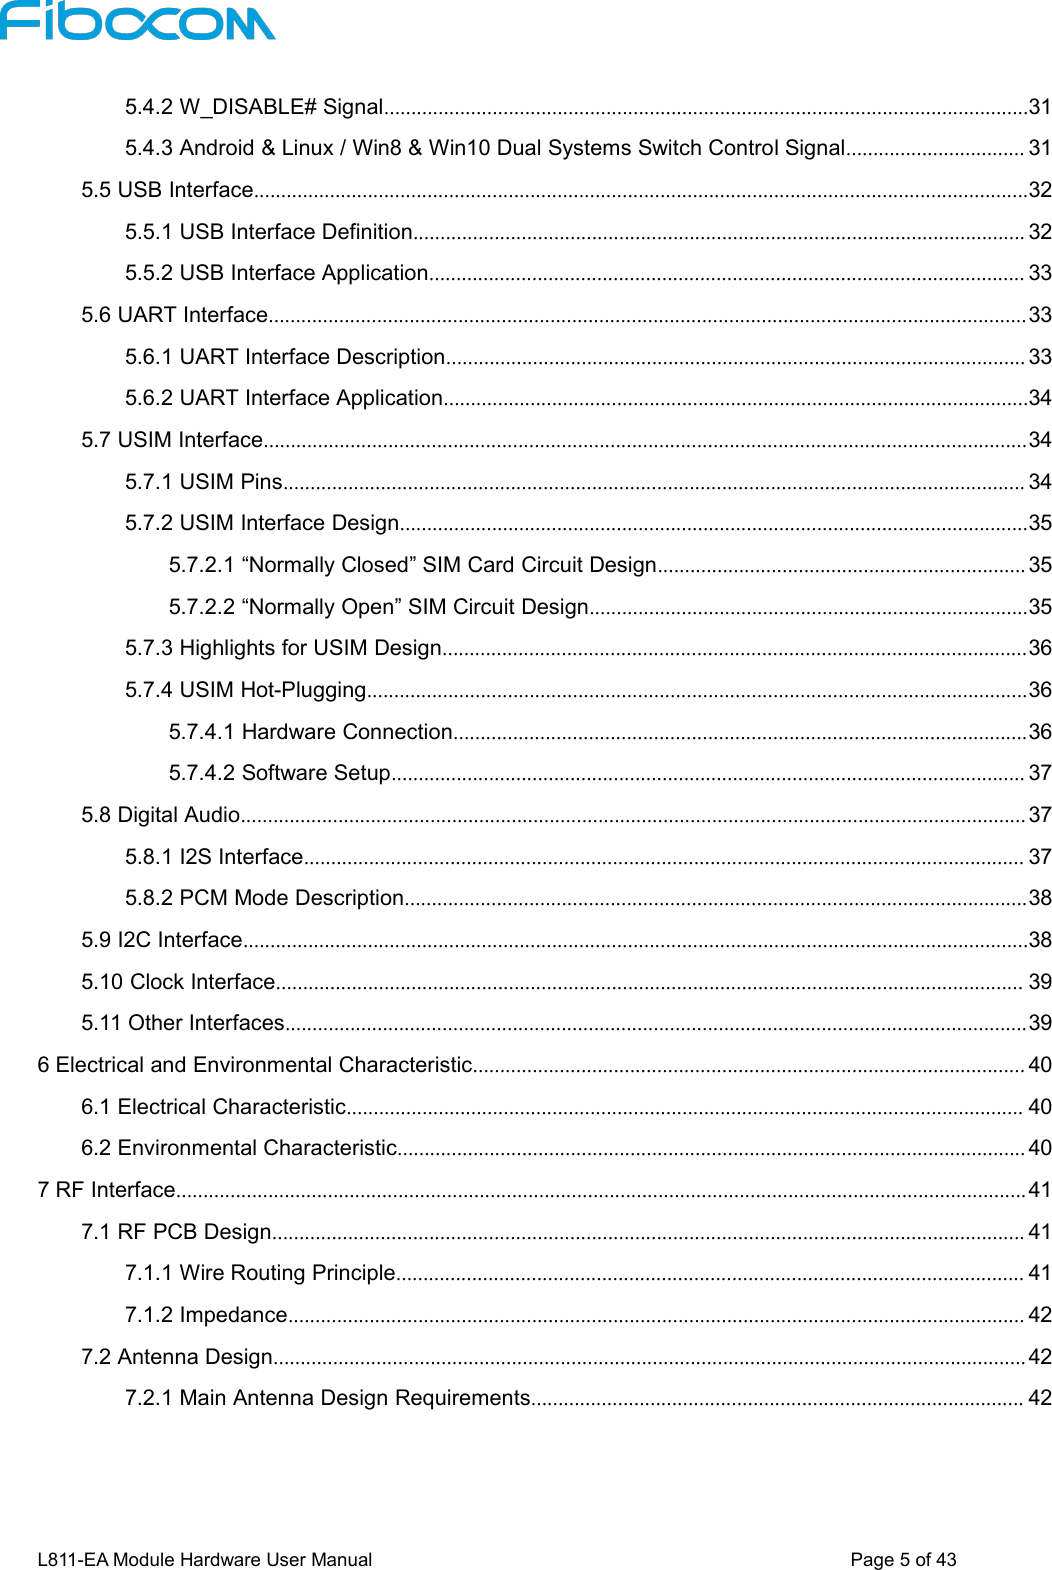 L811-EA Module Hardware User Manual Page5of435.4.2 W_DISABLE# Signal.......................................................................................................................315.4.3 Android &amp; Linux / Win8 &amp; Win10 Dual Systems Switch Control Signal................................. 315.5 USB Interface...............................................................................................................................................325.5.1 USB Interface Definition................................................................................................................. 325.5.2 USB Interface Application.............................................................................................................. 335.6 UART Interface............................................................................................................................................335.6.1 UART Interface Description........................................................................................................... 335.6.2 UART Interface Application............................................................................................................345.7 USIM Interface.............................................................................................................................................345.7.1 USIM Pins......................................................................................................................................... 345.7.2 USIM Interface Design....................................................................................................................355.7.2.1 “Normally Closed” SIM Card Circuit Design.................................................................... 355.7.2.2 “Normally Open” SIM Circuit Design.................................................................................355.7.3 Highlights for USIM Design............................................................................................................365.7.4 USIM Hot-Plugging..........................................................................................................................365.7.4.1 Hardware Connection..........................................................................................................365.7.4.2 Software Setup..................................................................................................................... 375.8 Digital Audio................................................................................................................................................. 375.8.1 I2S Interface..................................................................................................................................... 375.8.2 PCM Mode Description...................................................................................................................385.9 I2C Interface.................................................................................................................................................385.10 Clock Interface.......................................................................................................................................... 395.11 Other Interfaces.........................................................................................................................................396 Electrical and Environmental Characteristic...................................................................................................... 406.1 Electrical Characteristic............................................................................................................................. 406.2 Environmental Characteristic.................................................................................................................... 407 RF Interface............................................................................................................................................................. 417.1 RF PCB Design........................................................................................................................................... 417.1.1 Wire Routing Principle.................................................................................................................... 417.1.2 Impedance........................................................................................................................................ 427.2 Antenna Design........................................................................................................................................... 427.2.1 Main Antenna Design Requirements........................................................................................... 42